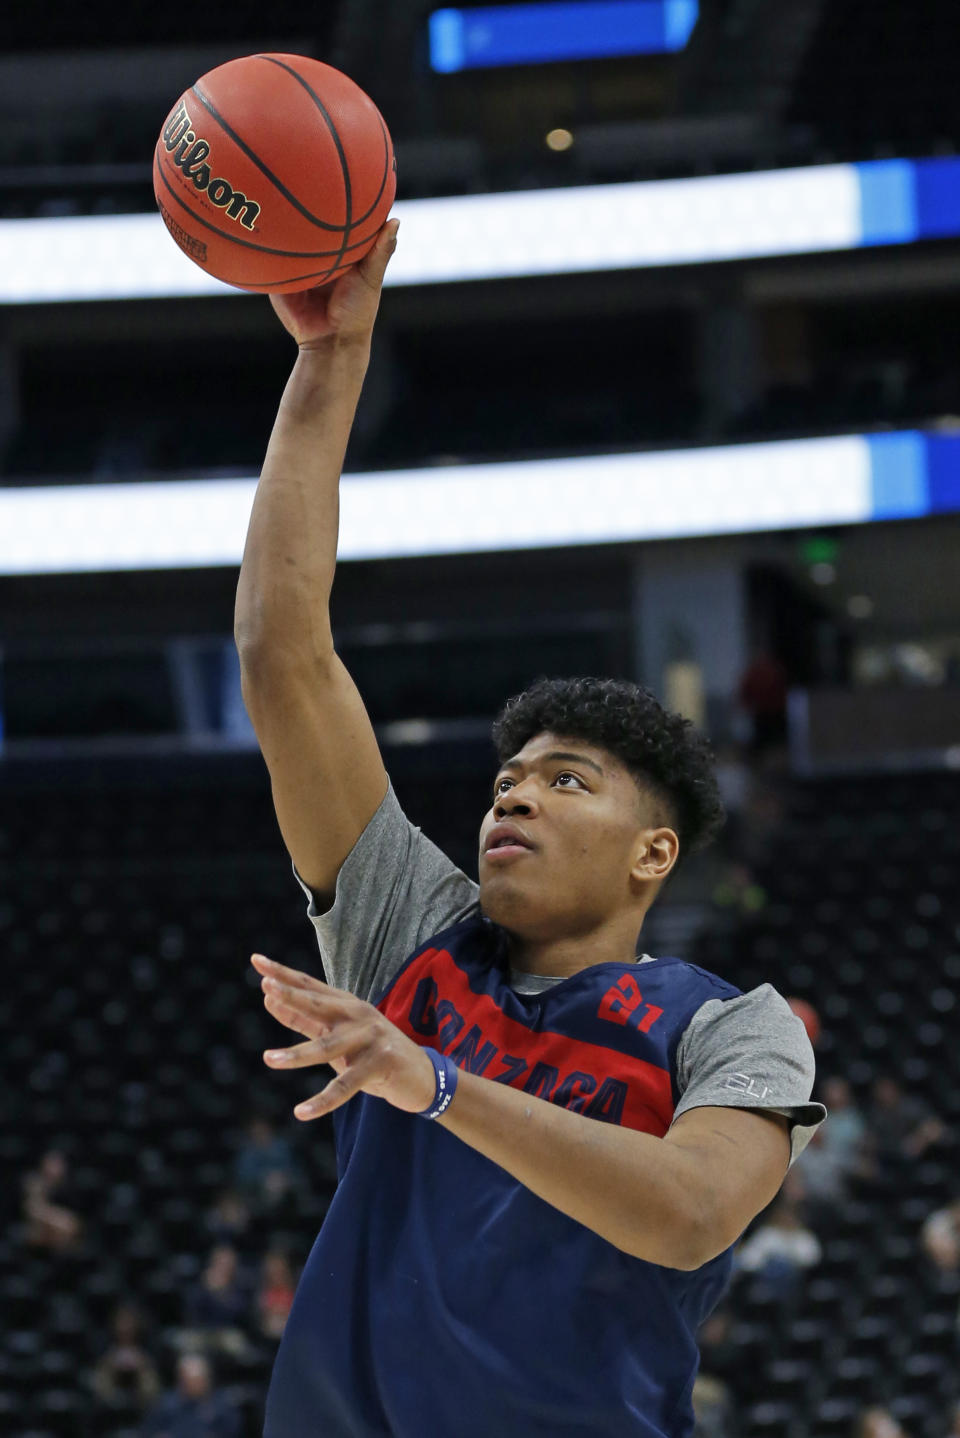 Gonzaga's Rui Hachimura shoots during practice for the NCAA men's college basketball tournament Wednesday, March 20, 2019, in Salt Lake City. Gonzaga plays Fairleigh Dickinson on Thursday. (AP Photo/Rick Bowmer)